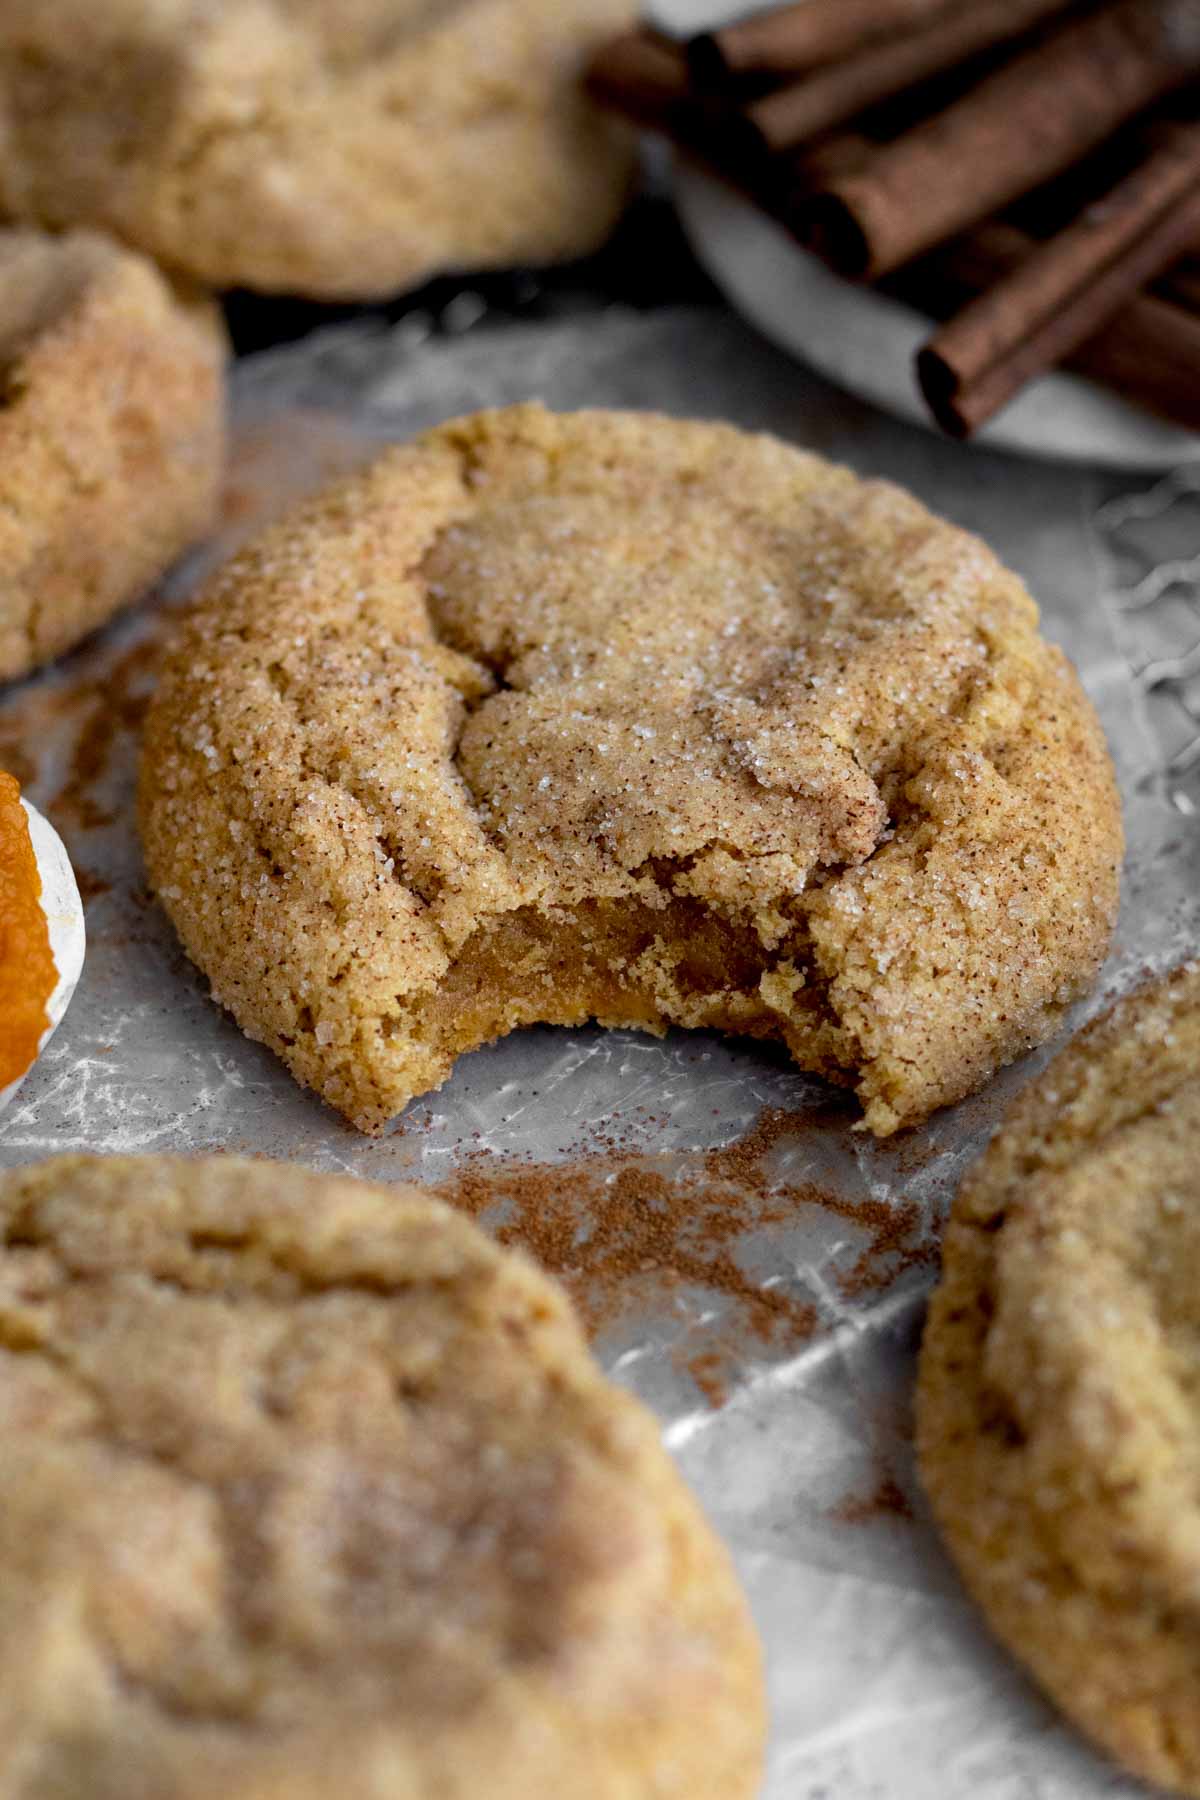 Biting into the Pumpkin Snickerdoodle Cookie cracks its crispy exterior, revealing a cozy, deliciously soft interior.